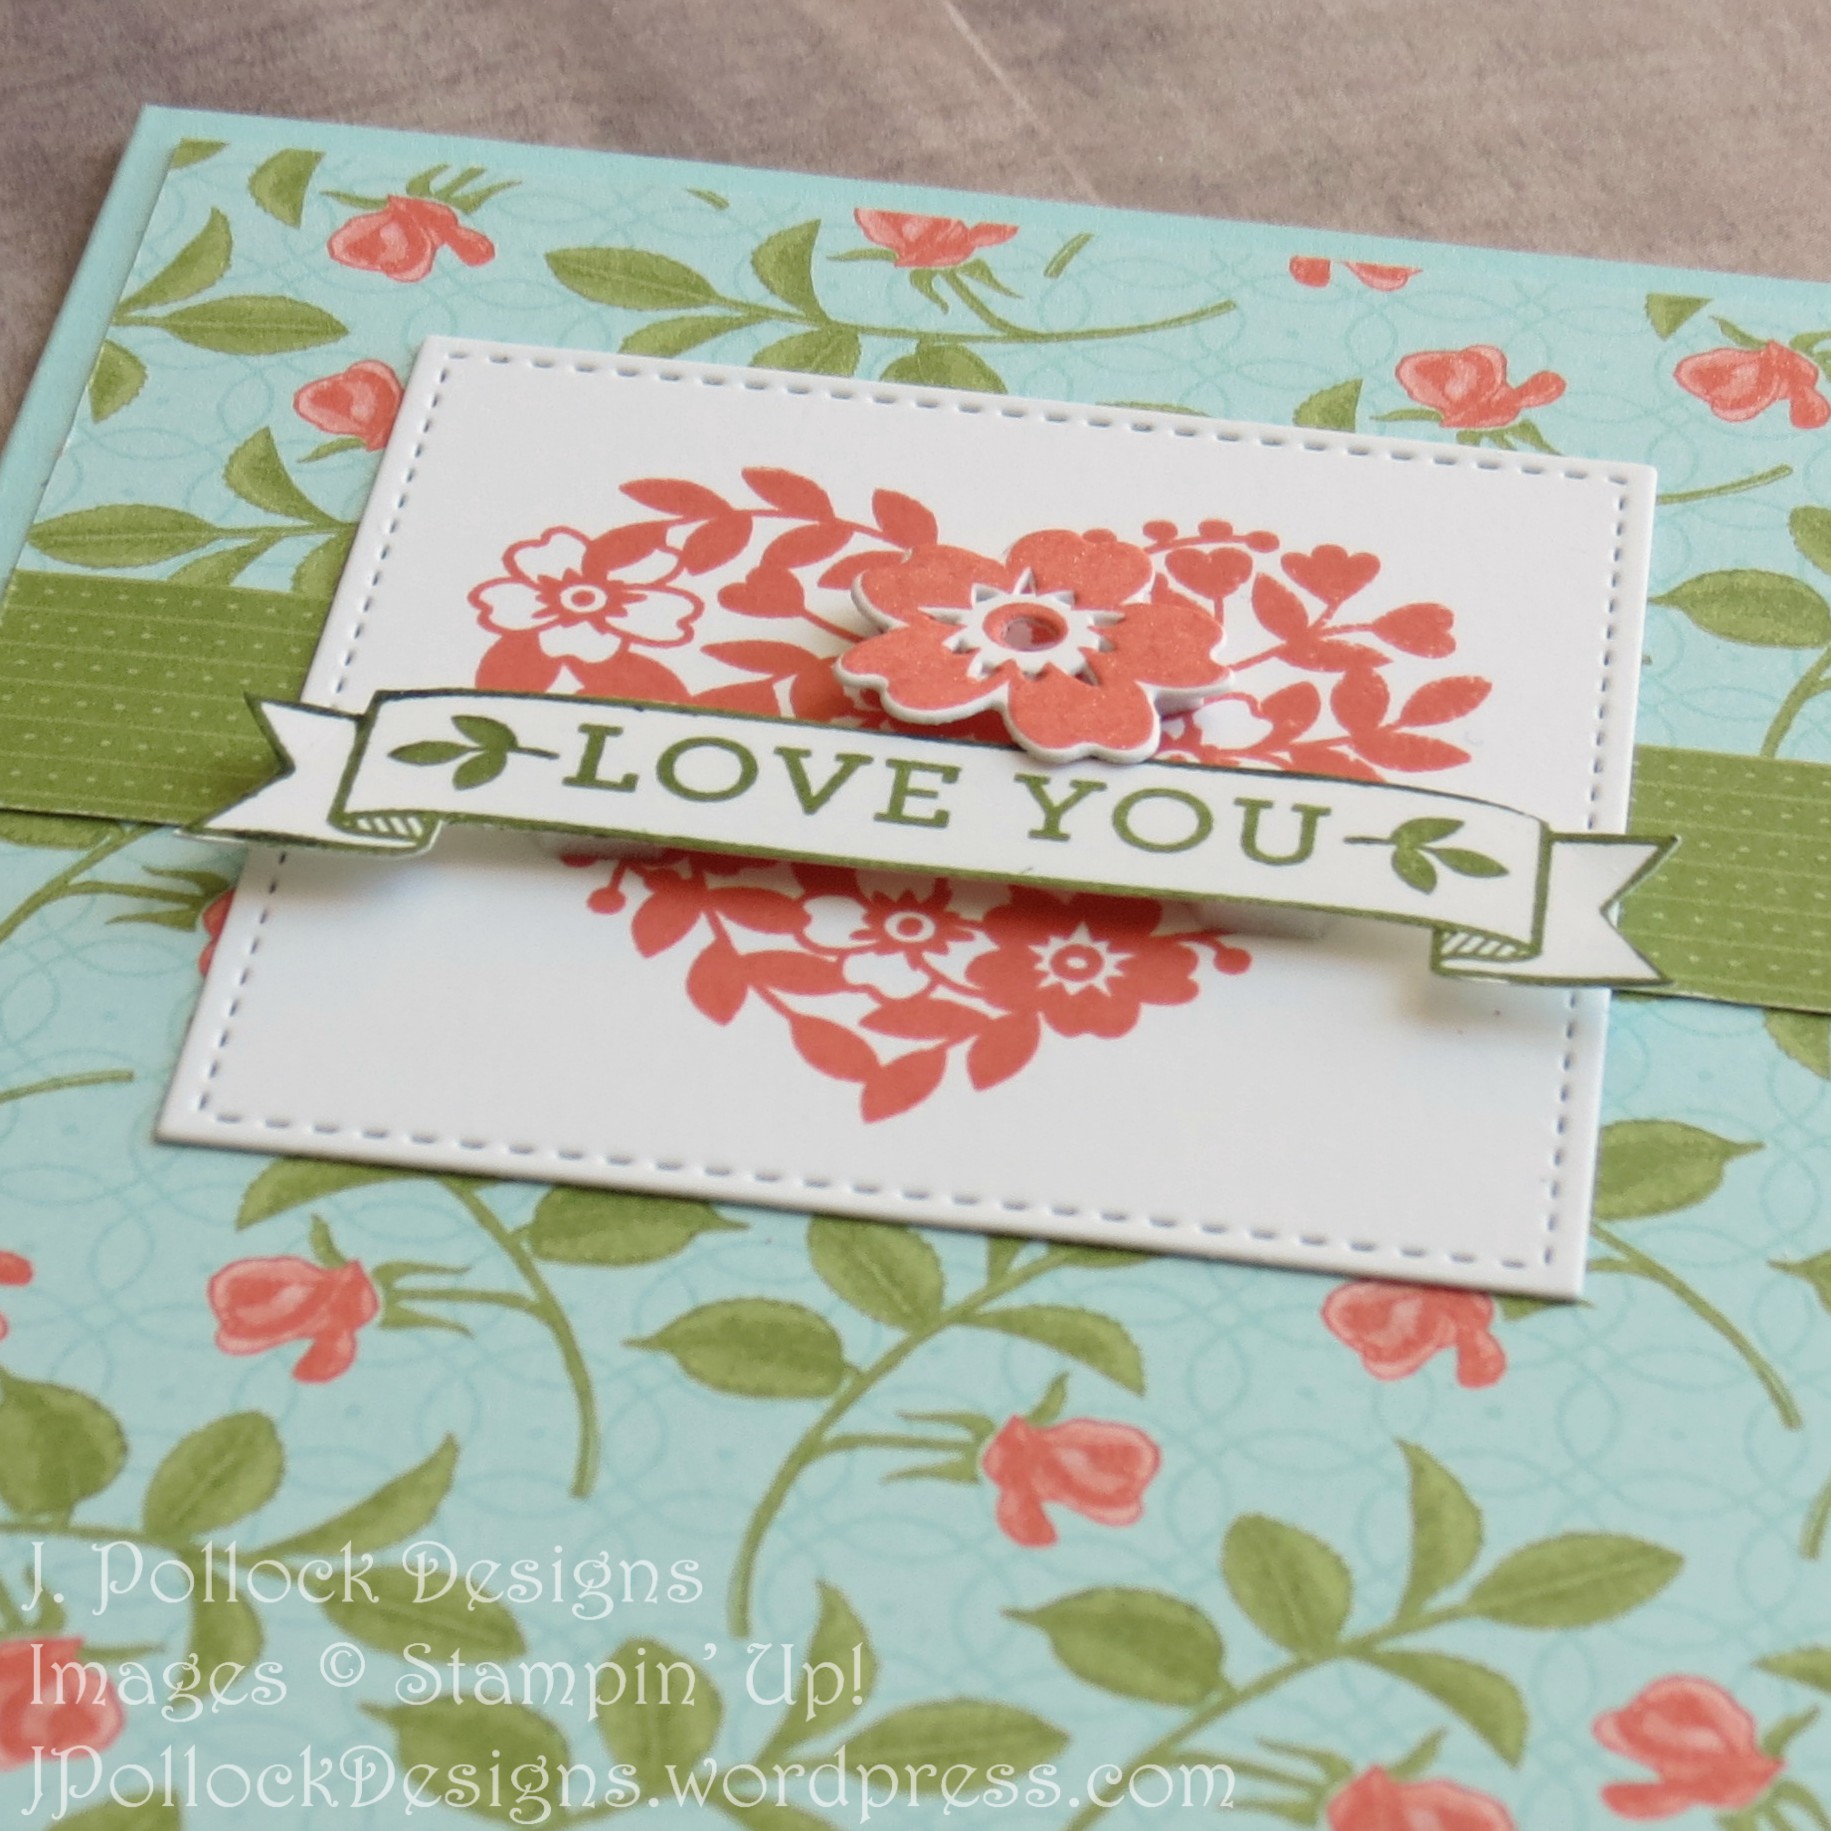 J. Pollock Designs - Stampin' Up! - Bloomin' Love, Bloomin' Heart Thinlets